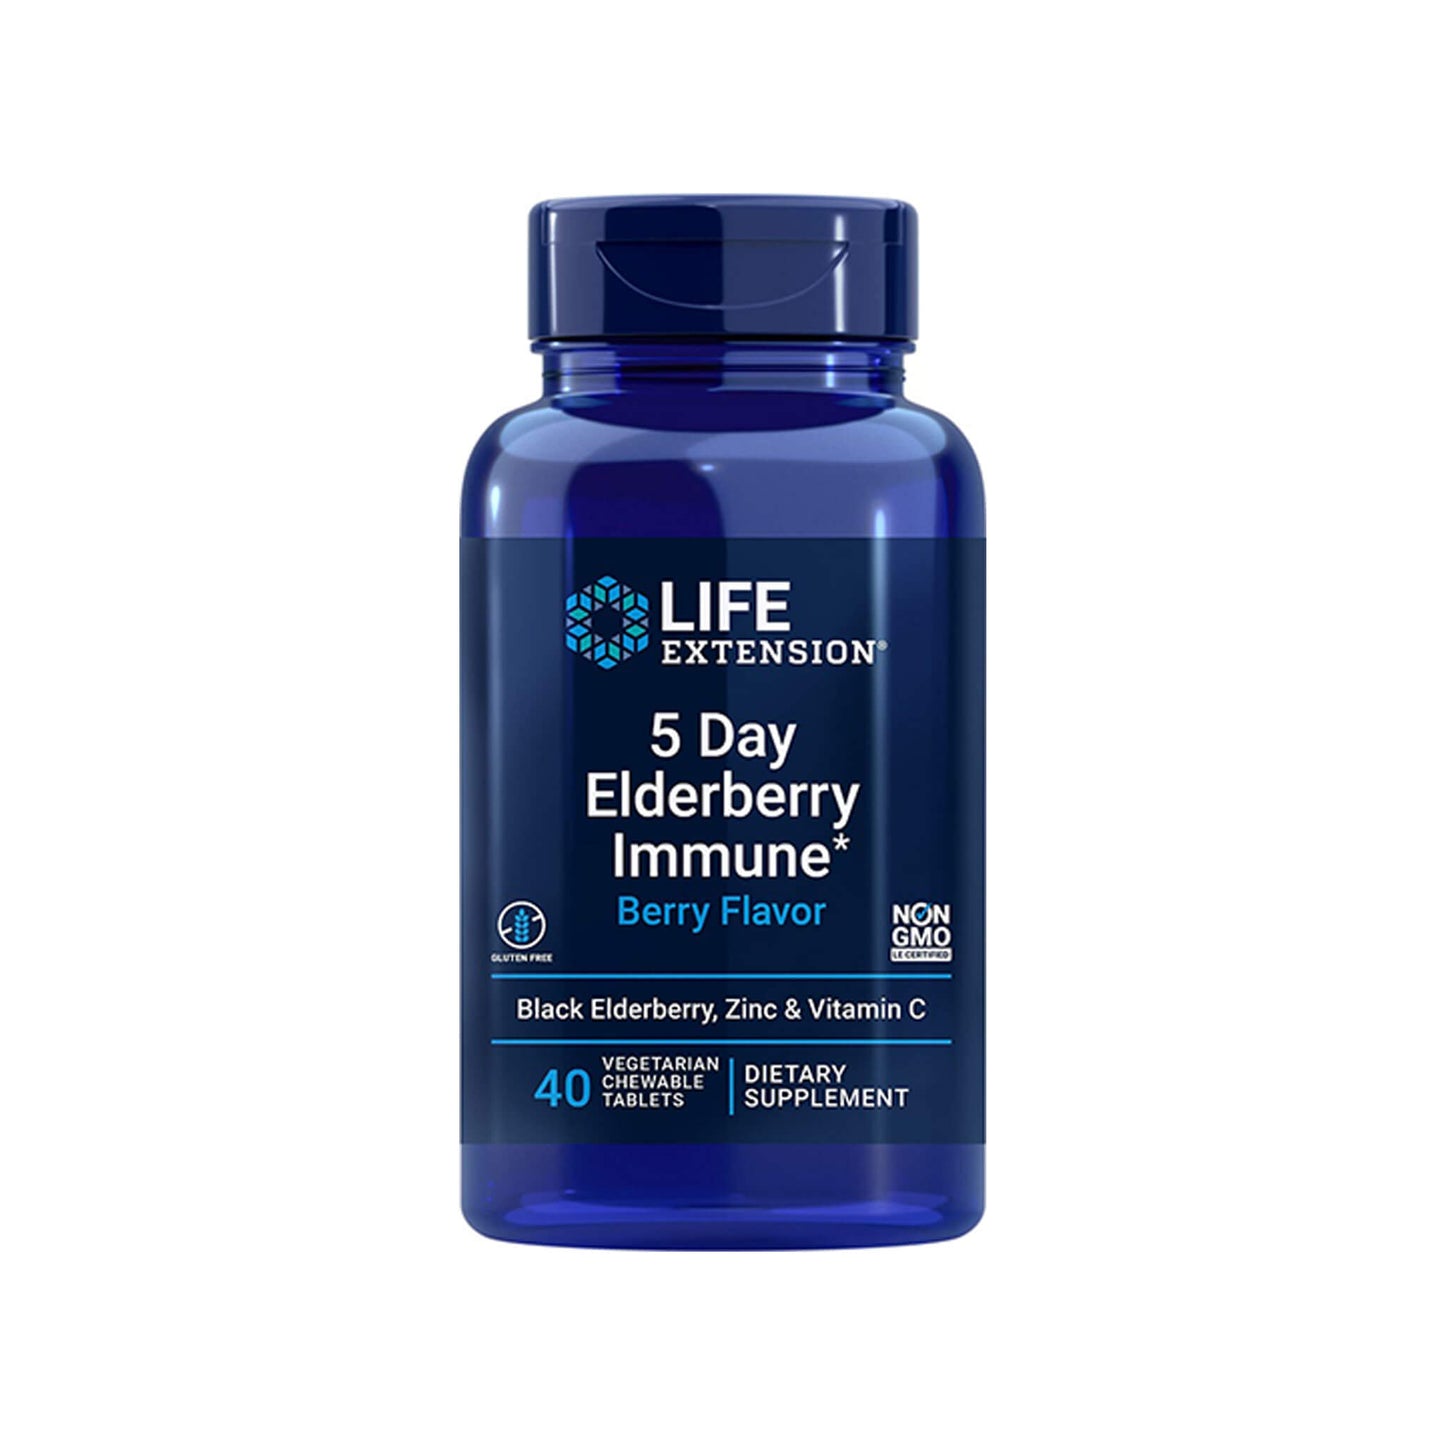 Life Extension 5 Day Elderberry Immune, Berry - 40 Chewable Tabs